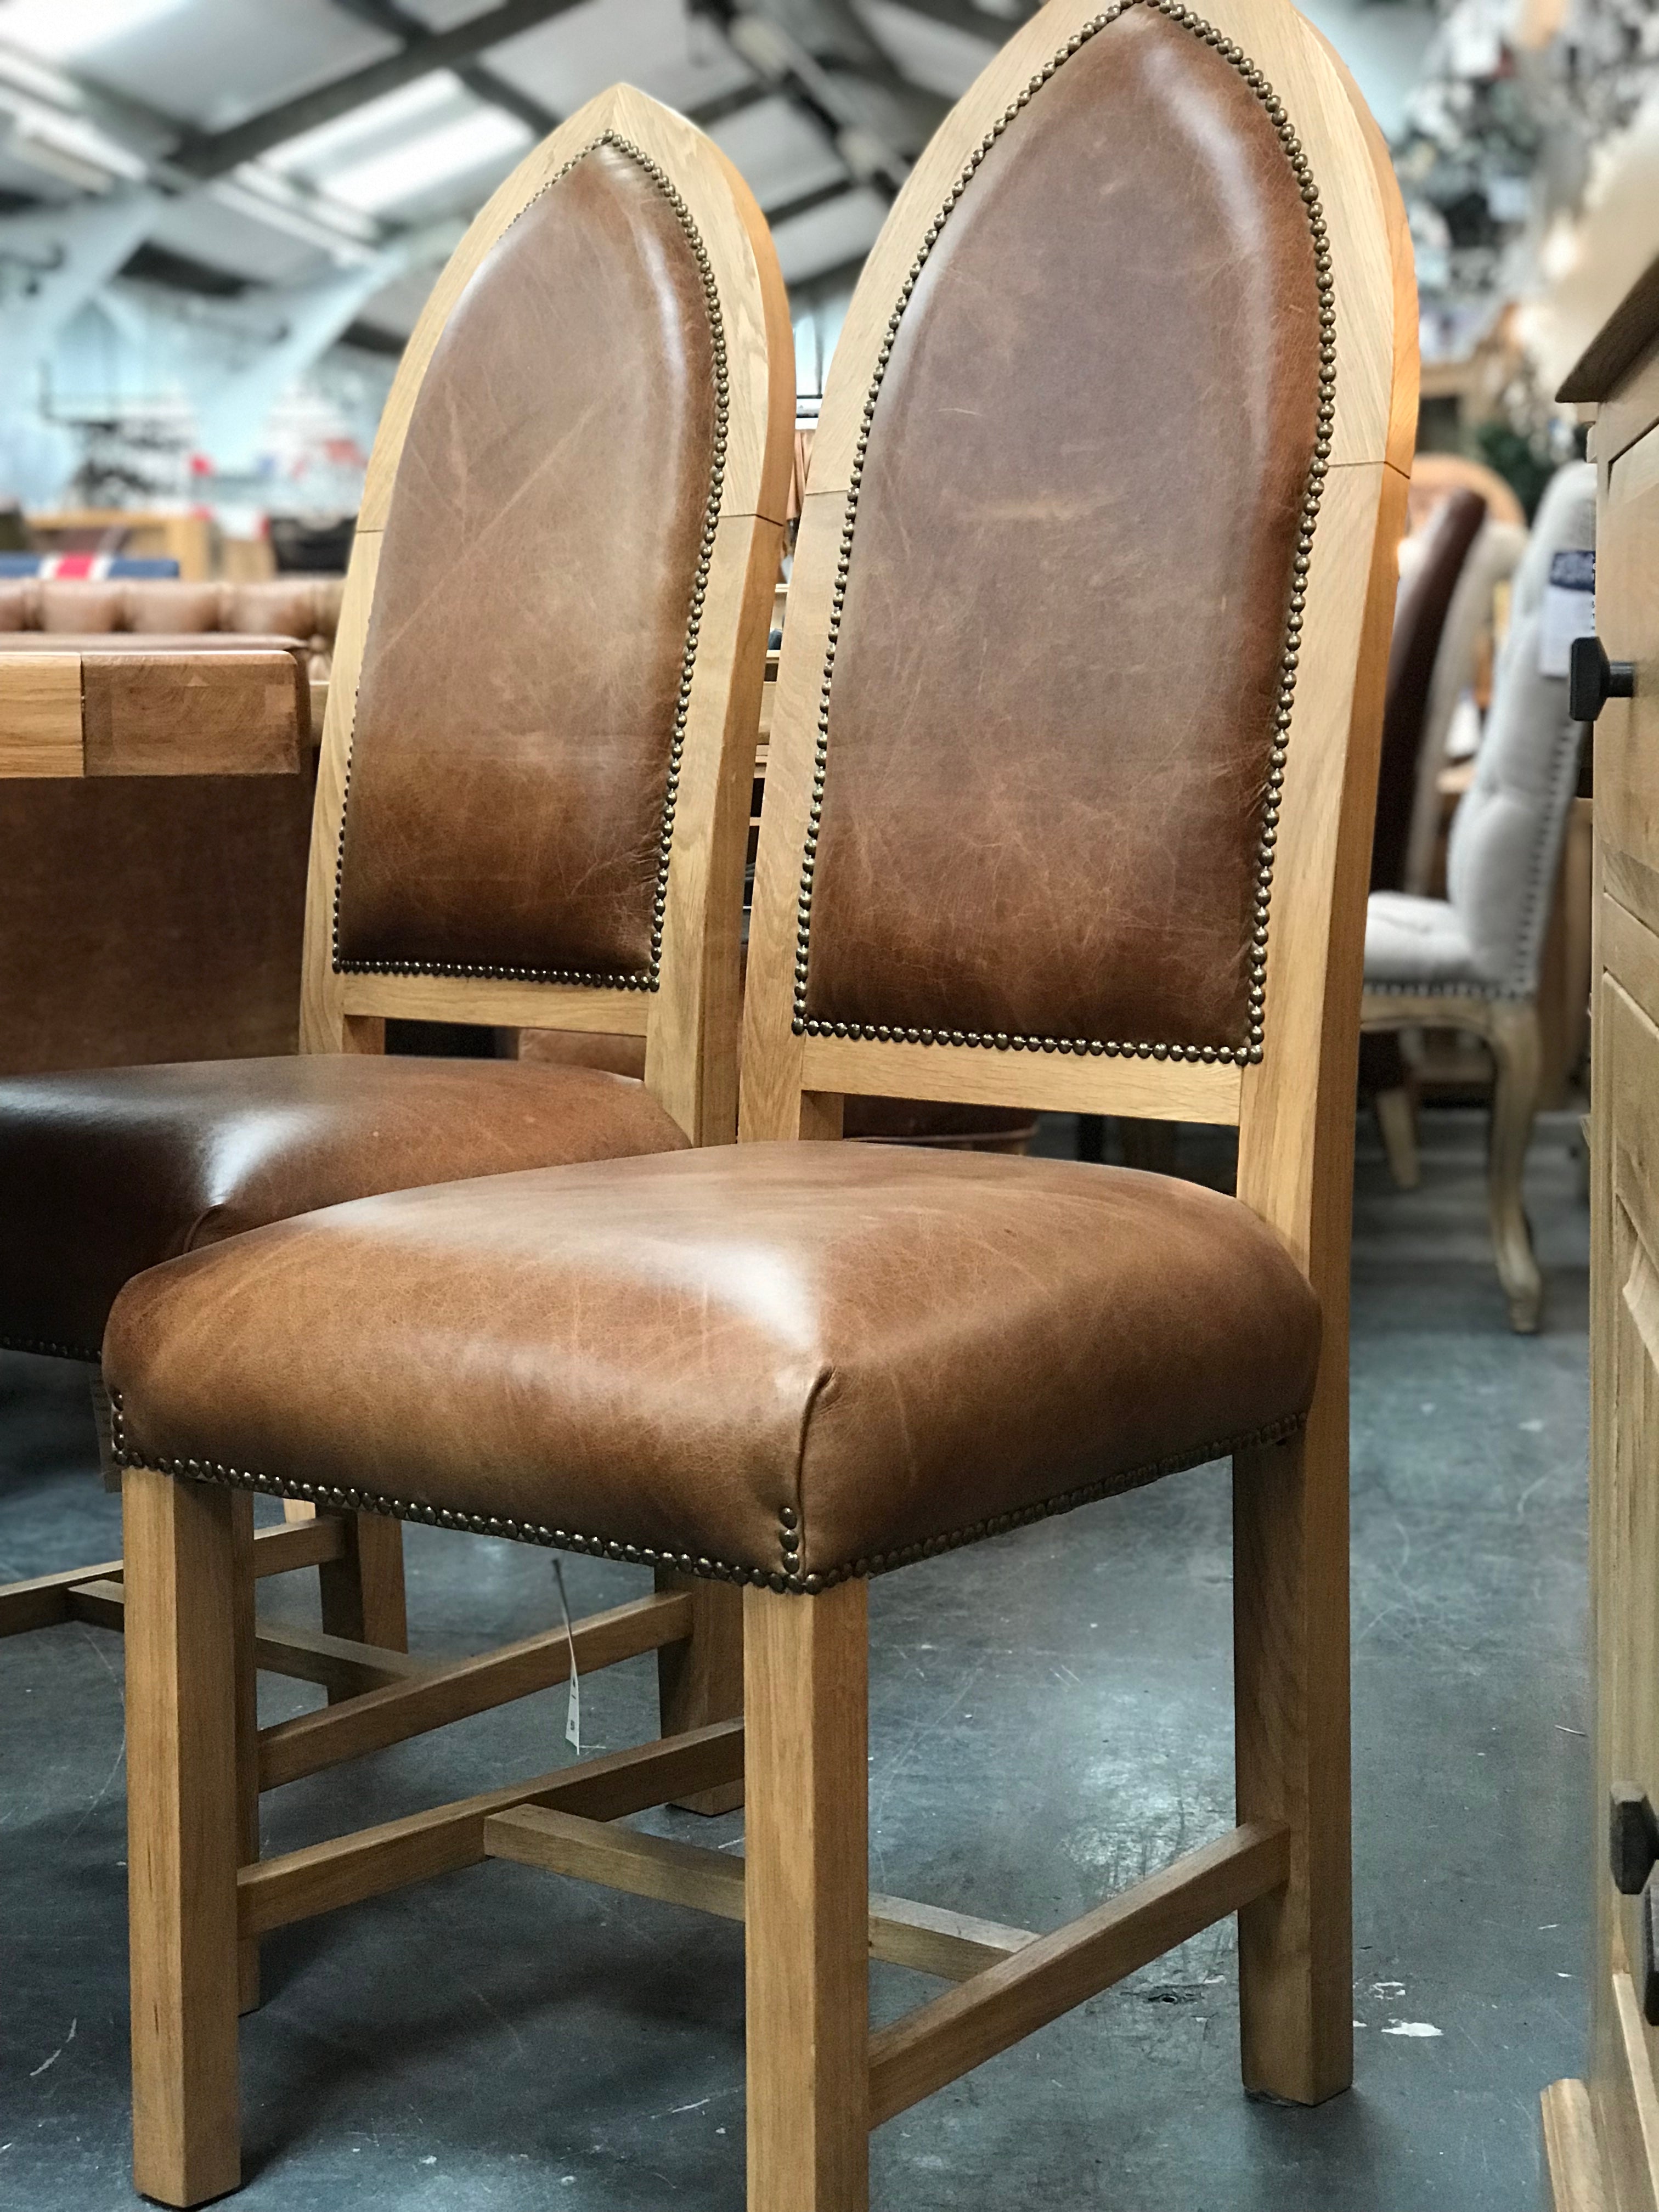 Cathedral Dining Chairs from Top Secret Furniture, Holmes Chapel